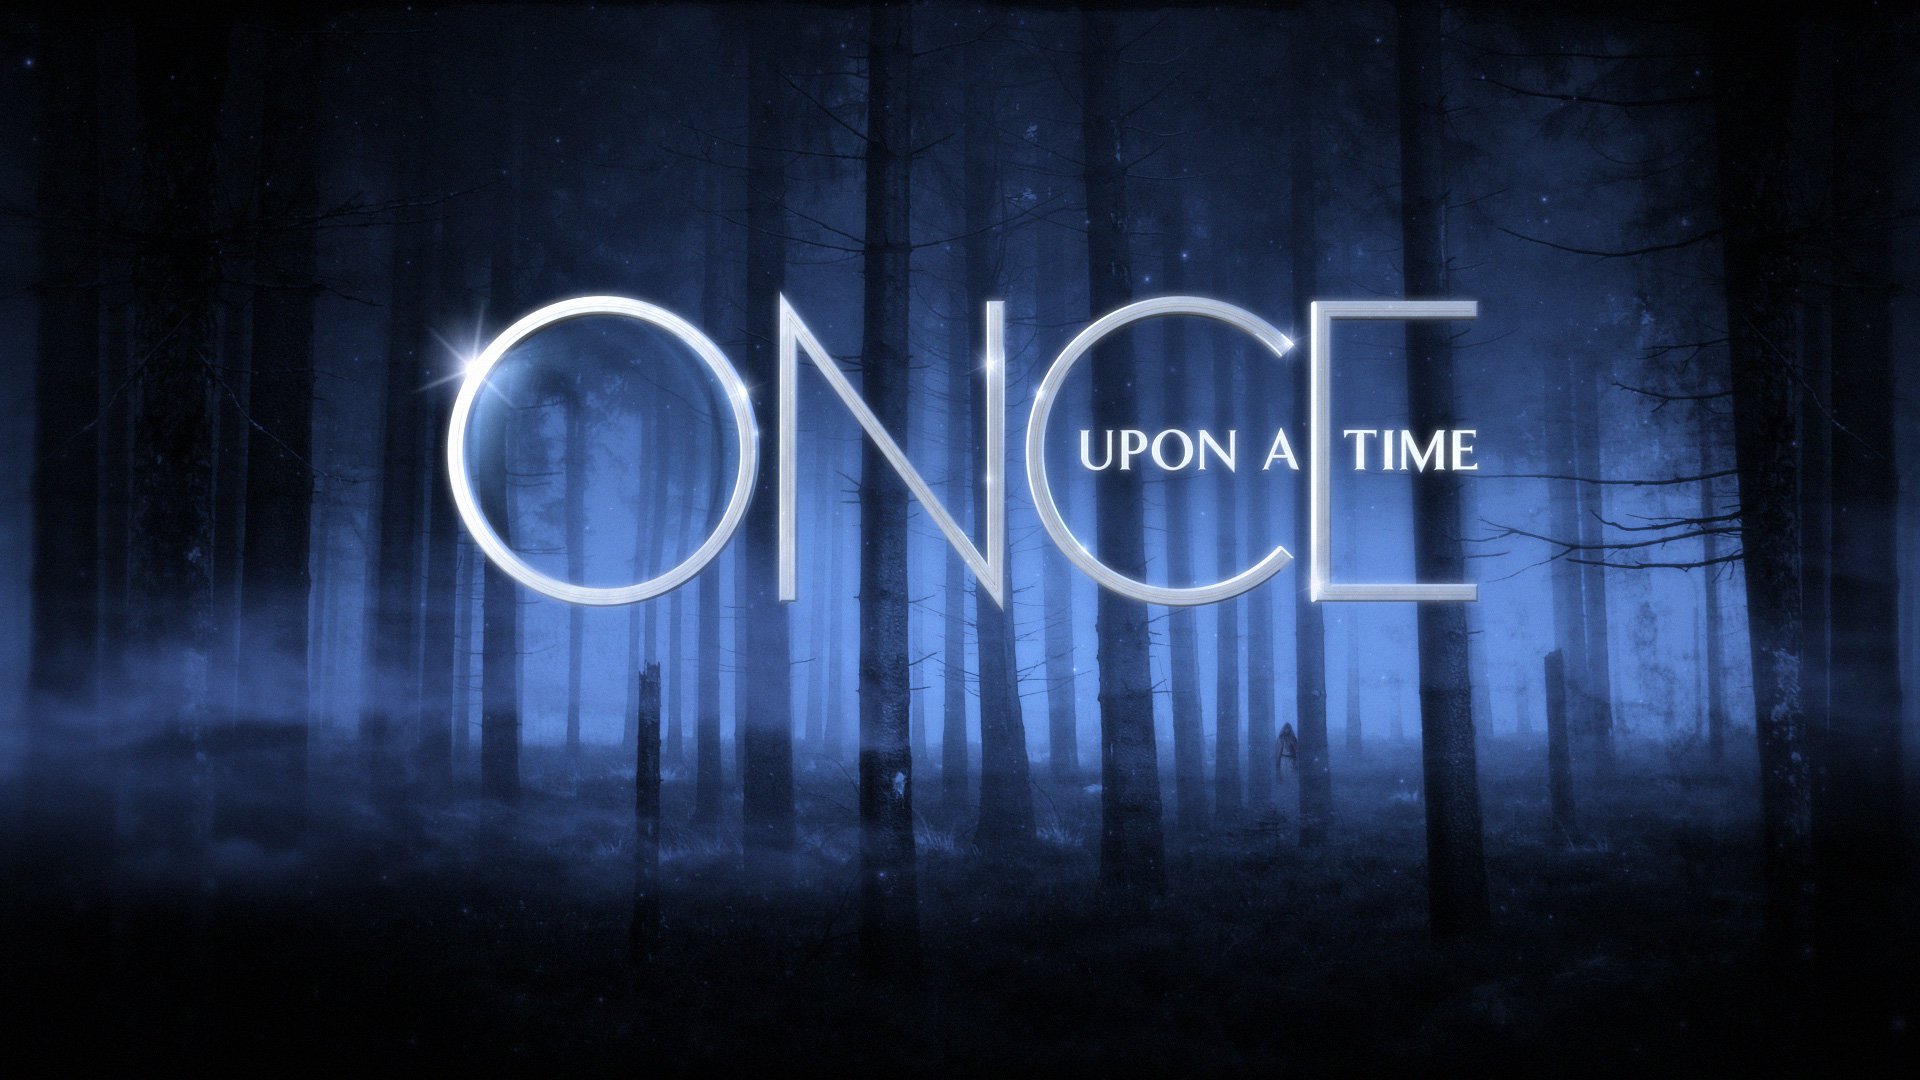 once upon a time short story summary